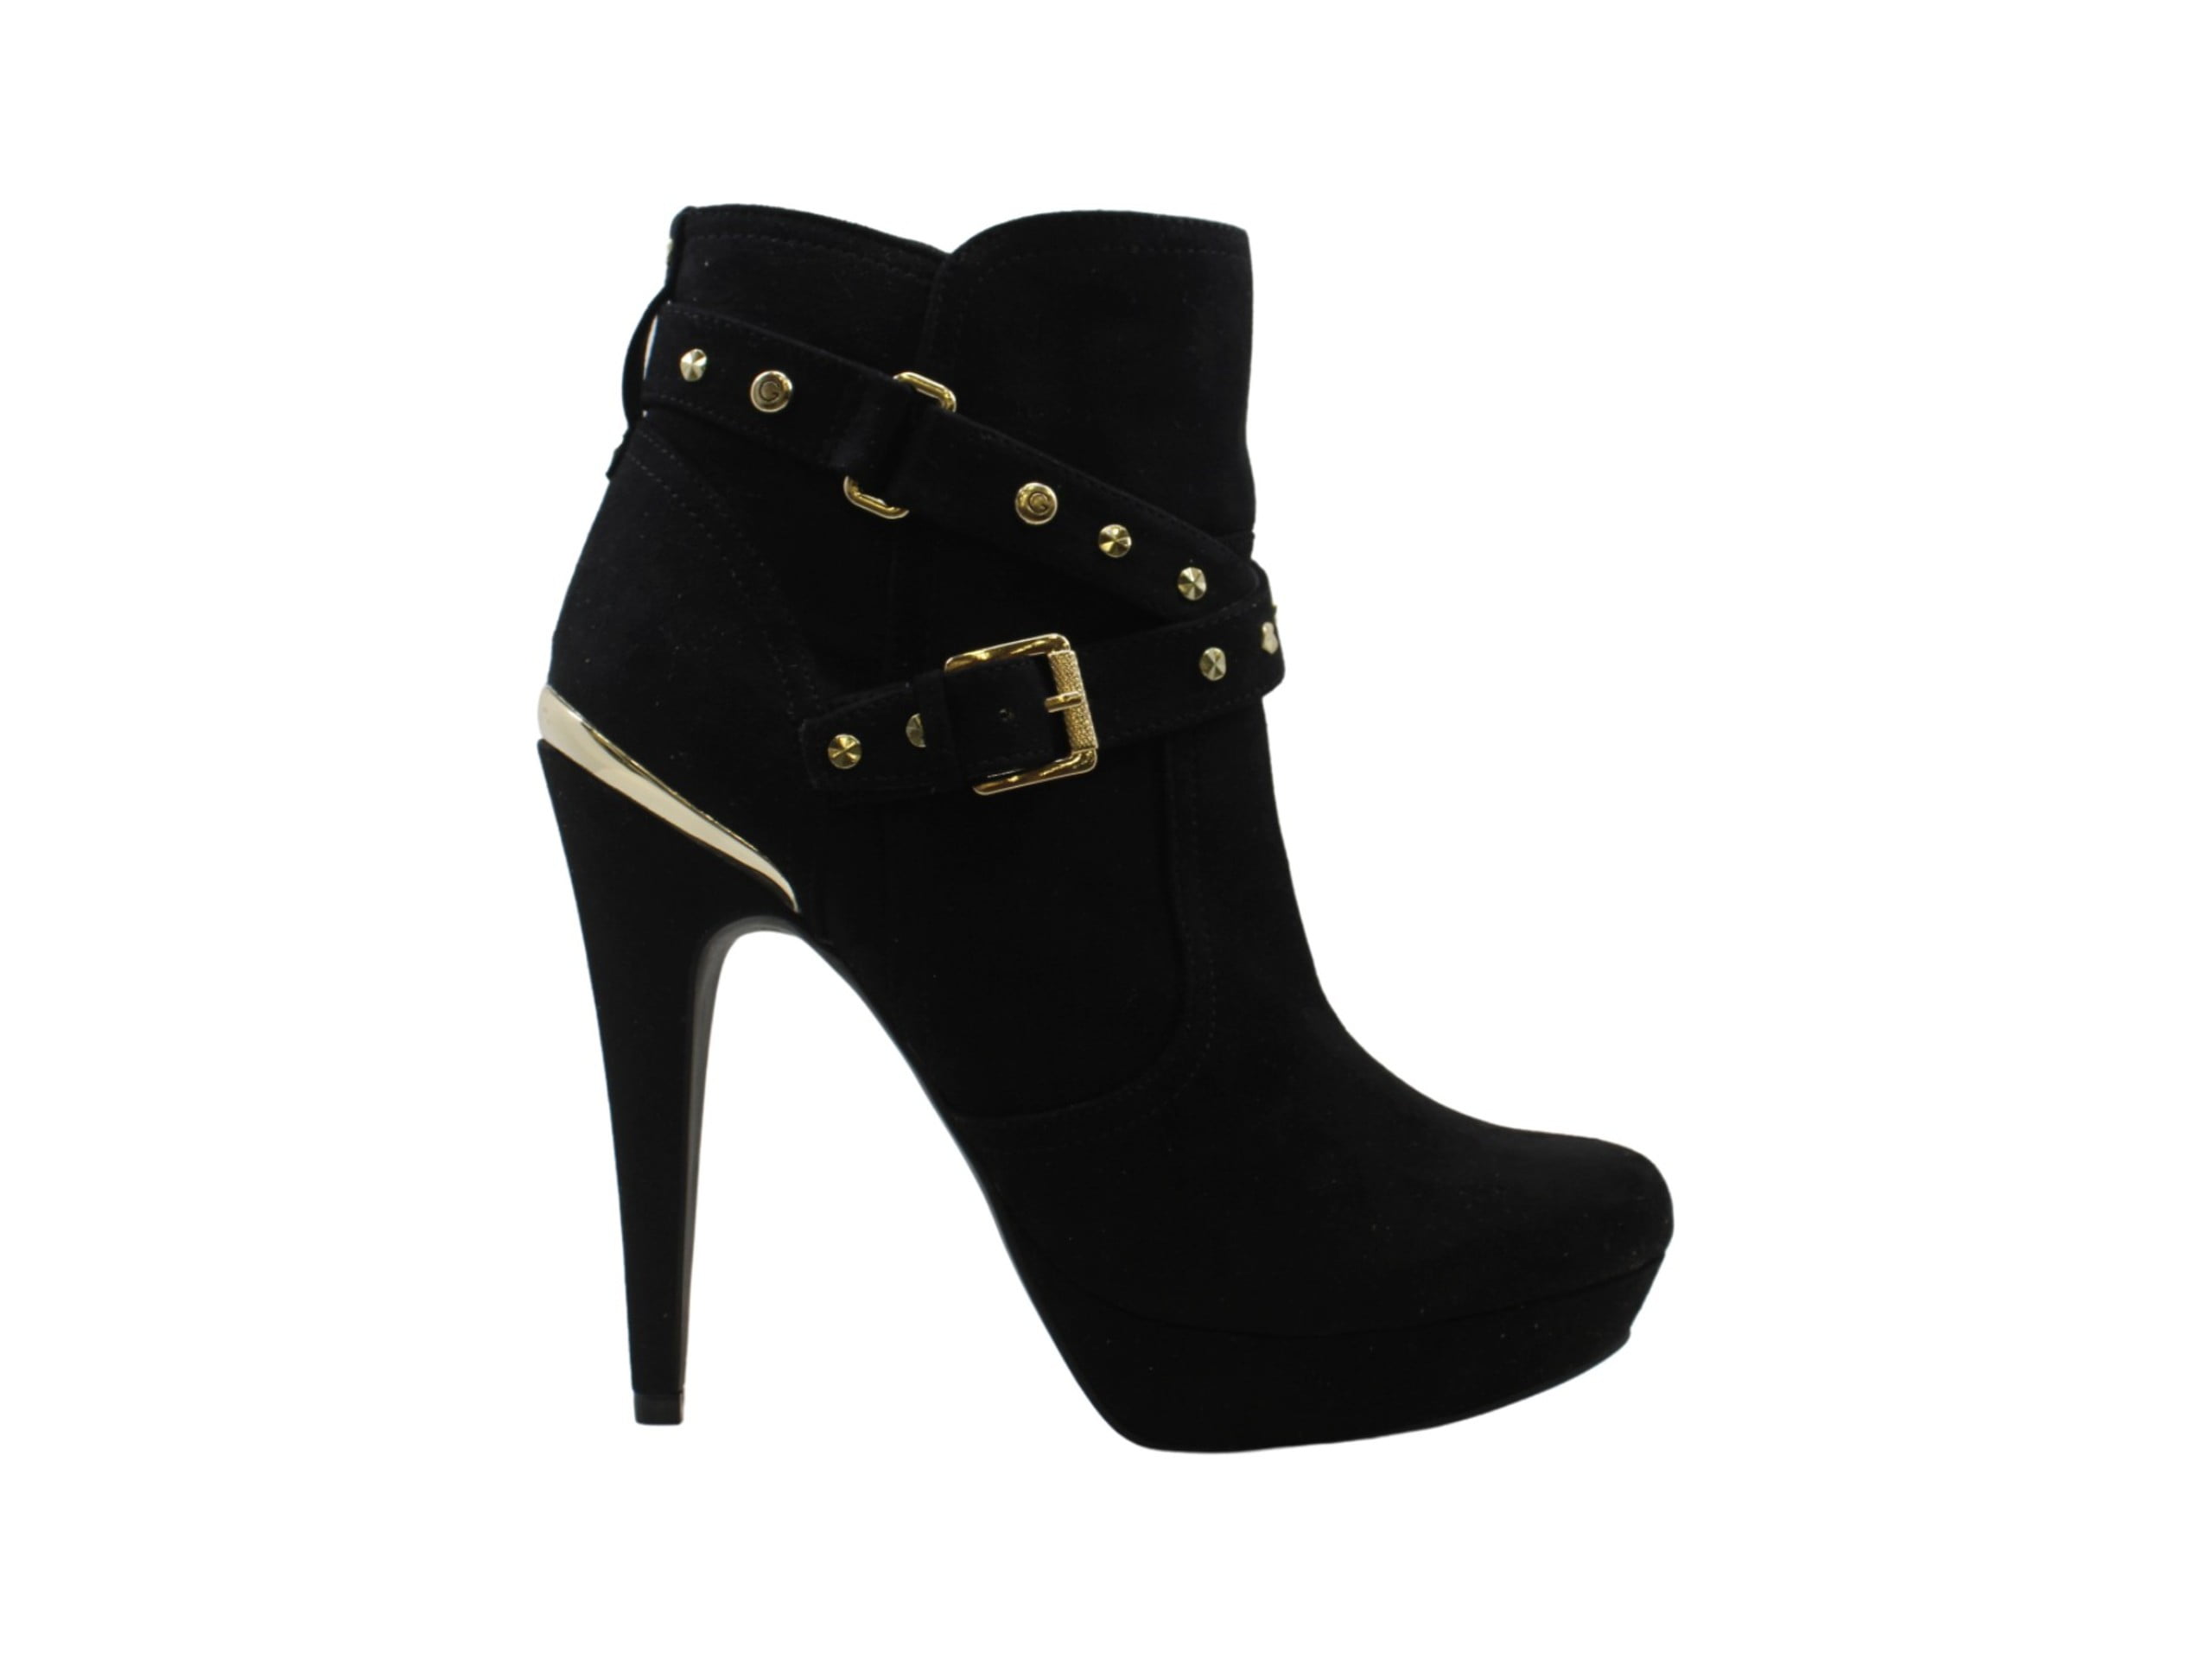 GUESS - Womens G By Guess Deeka Heeled Ankle Boots, Black Fabric, 8 US ...